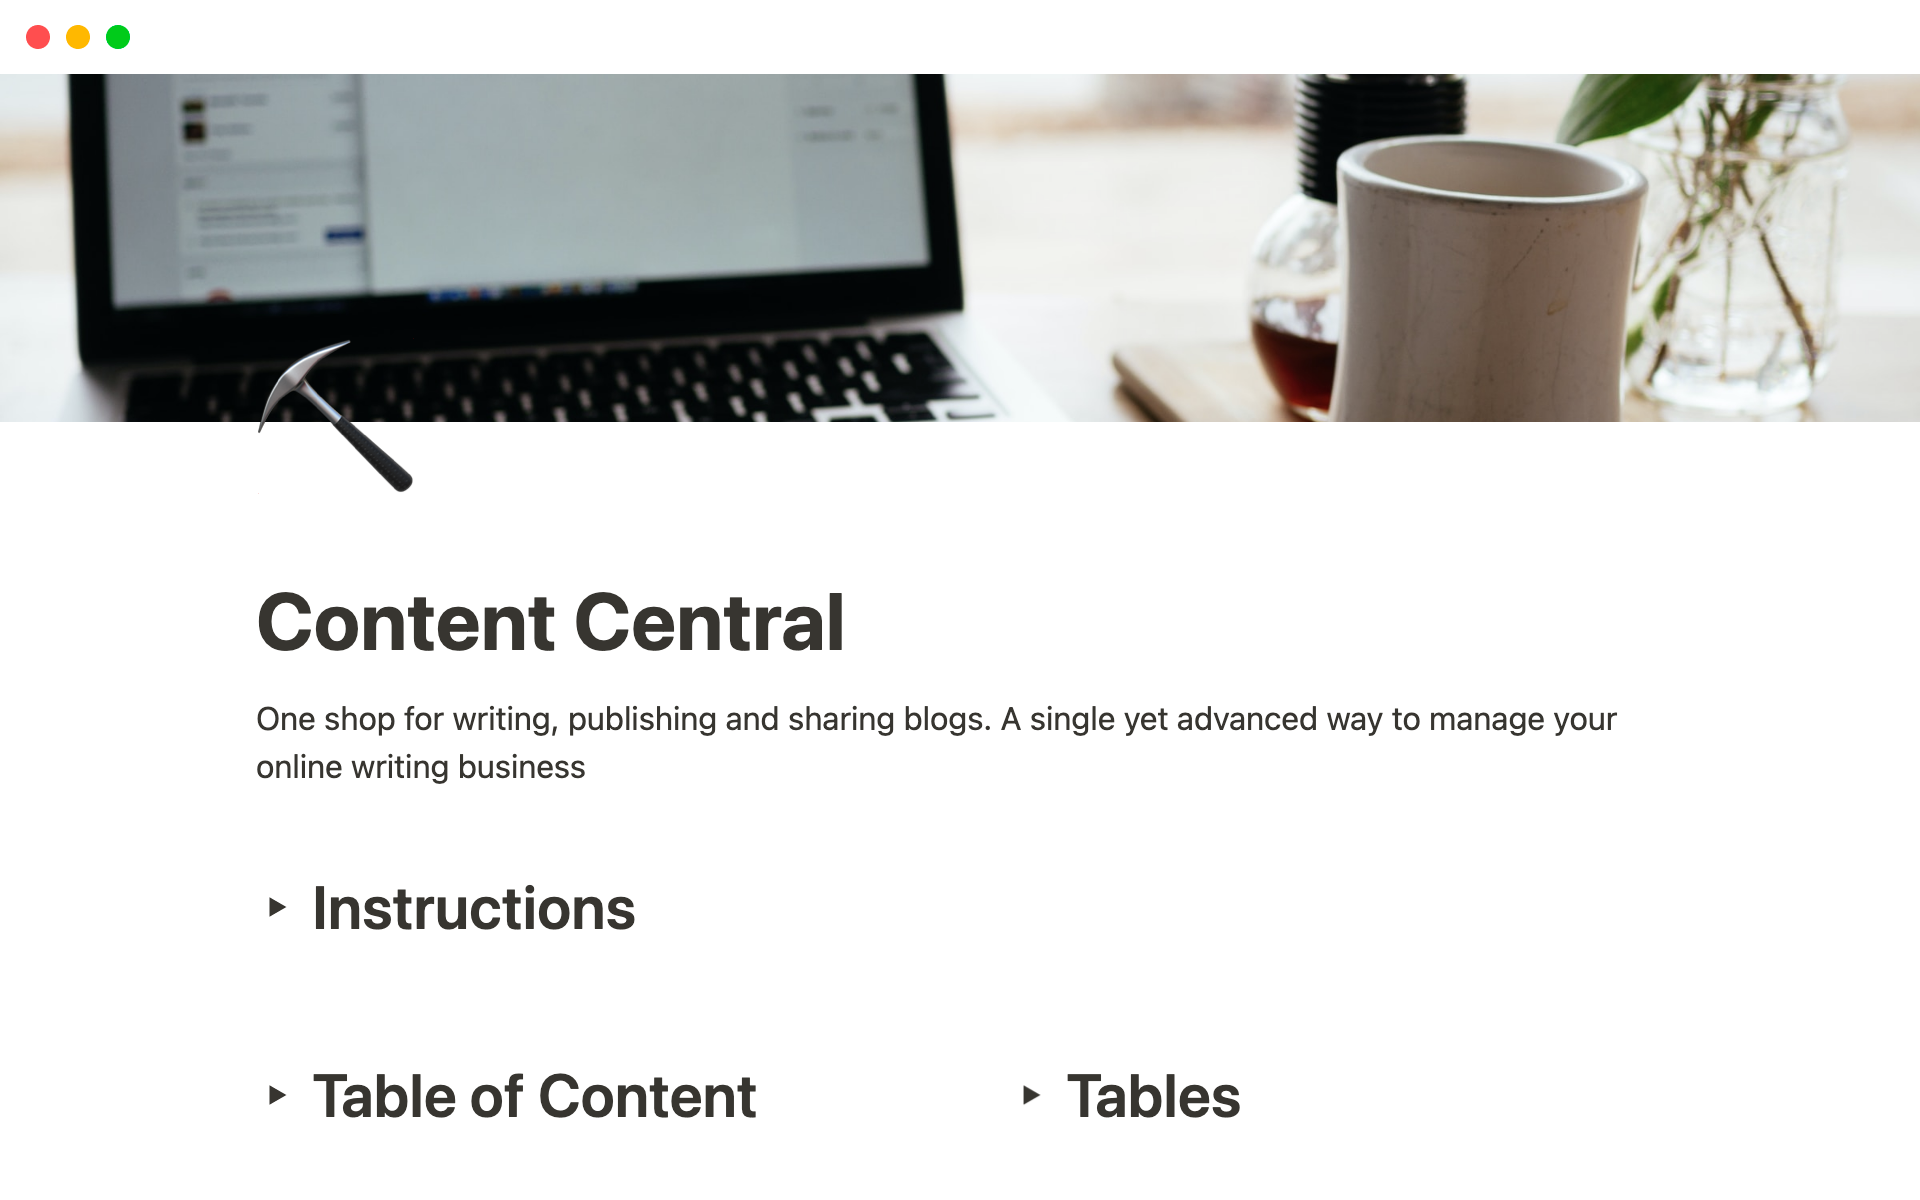 One shop for writing, publishing and sharing blogs. A single yet advanced way to manage your online writing business